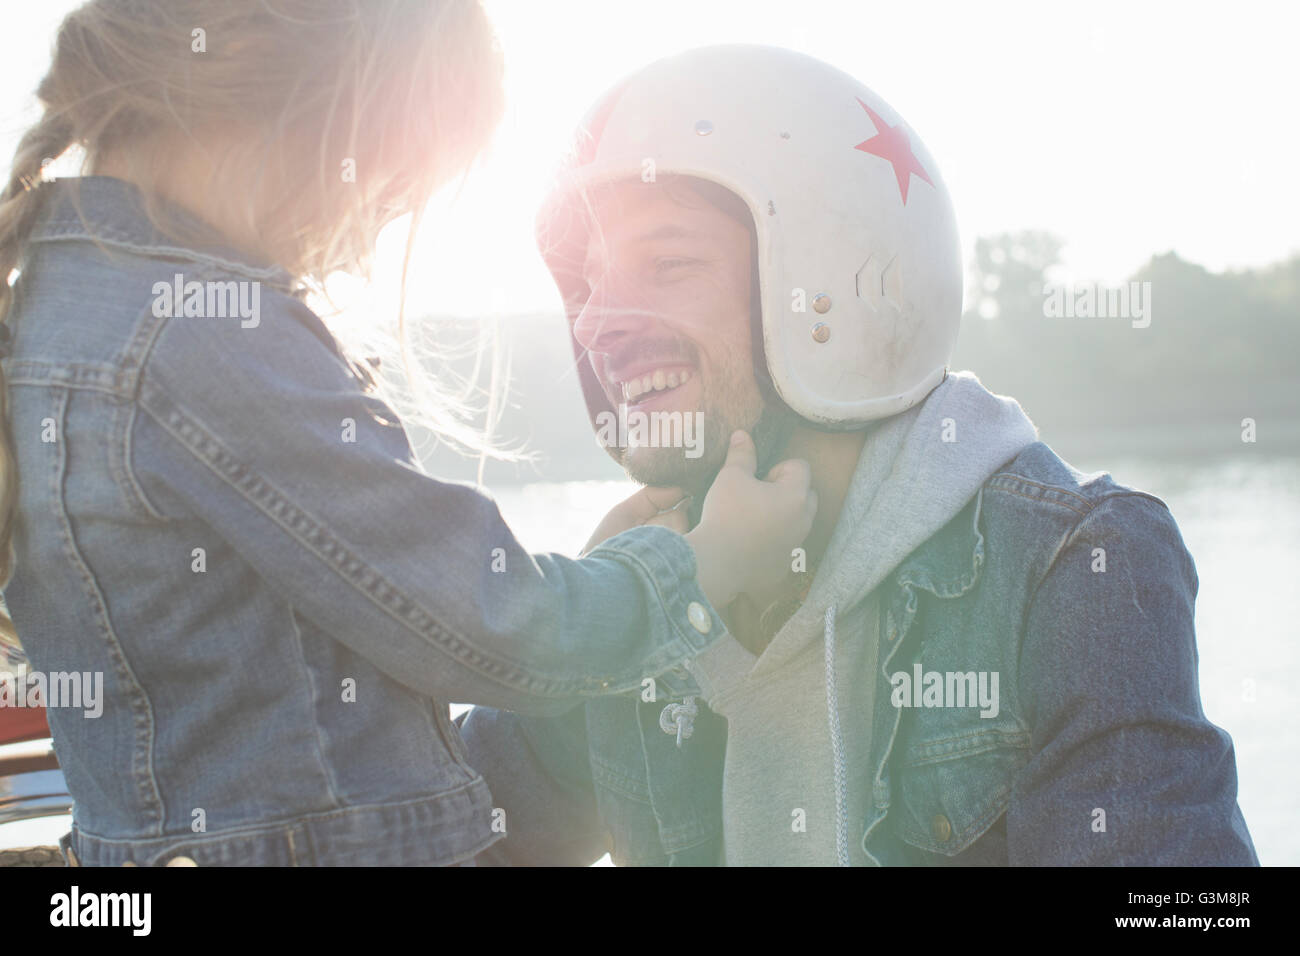 Young girl helping her father put on crash helmet Stock Photo